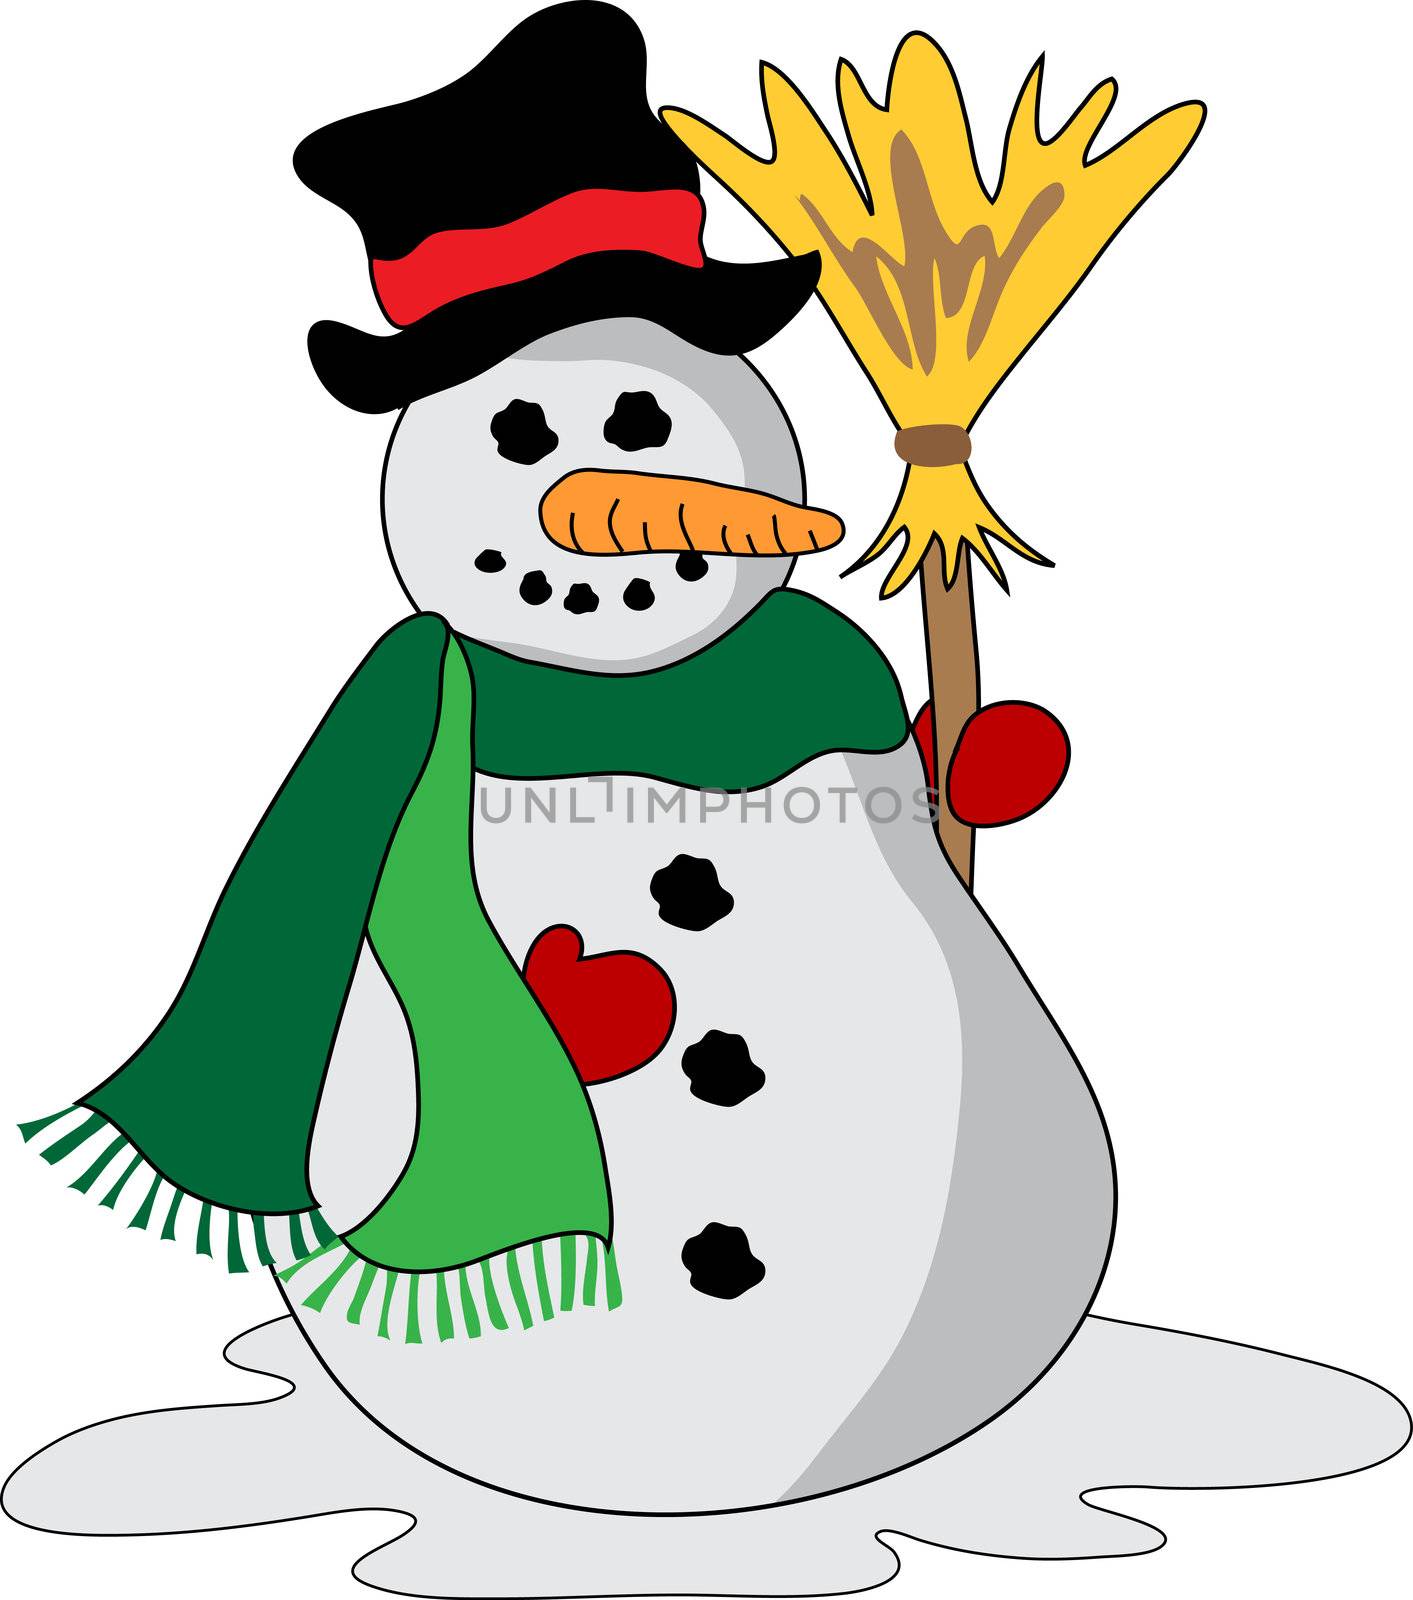 Snowman with broom by peromarketing